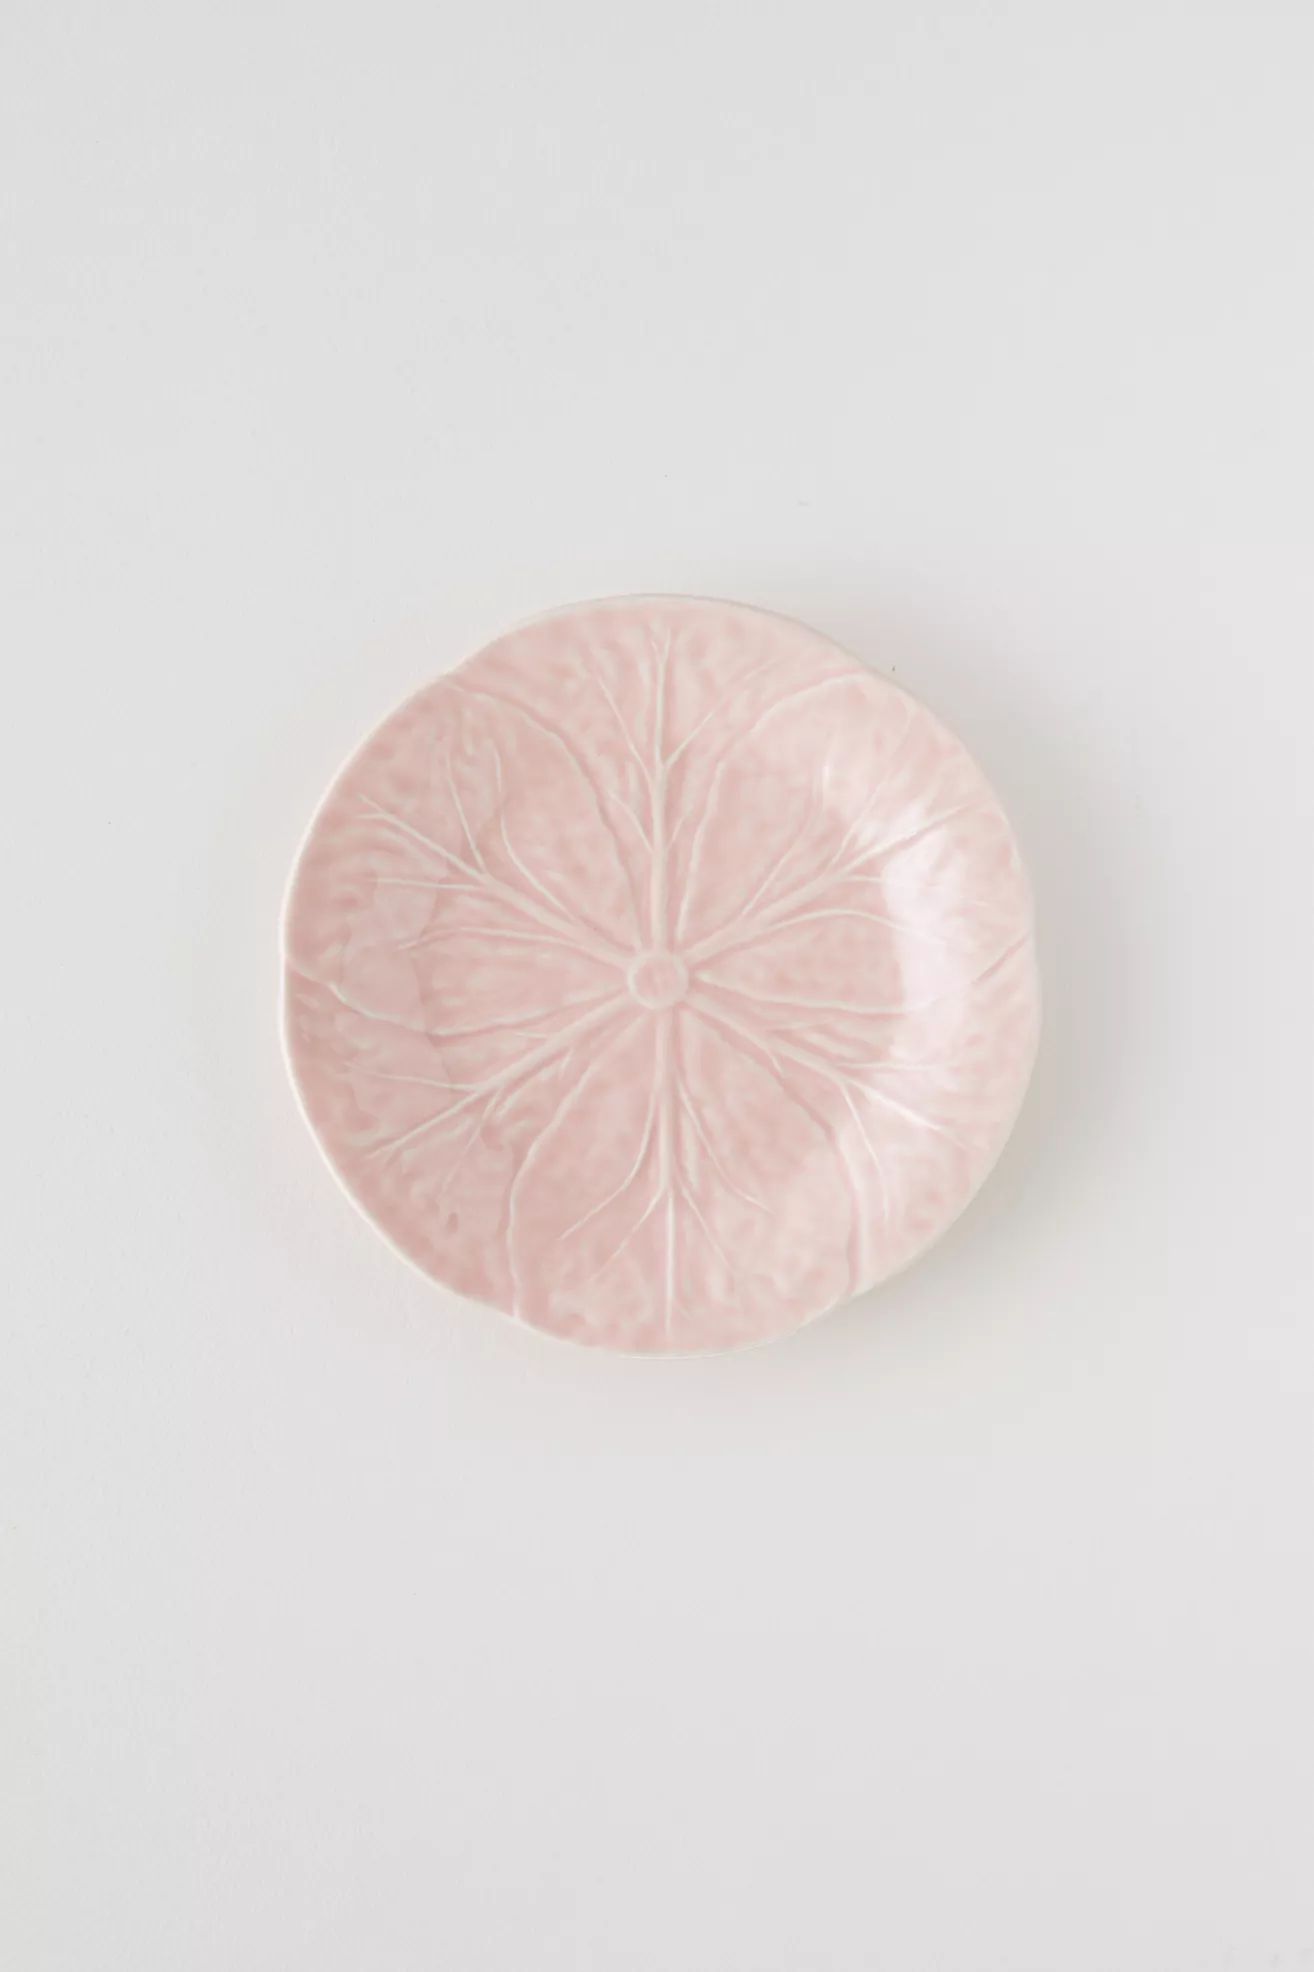 Ceramic Cabbage Plate Collection | Anthropologie (US)